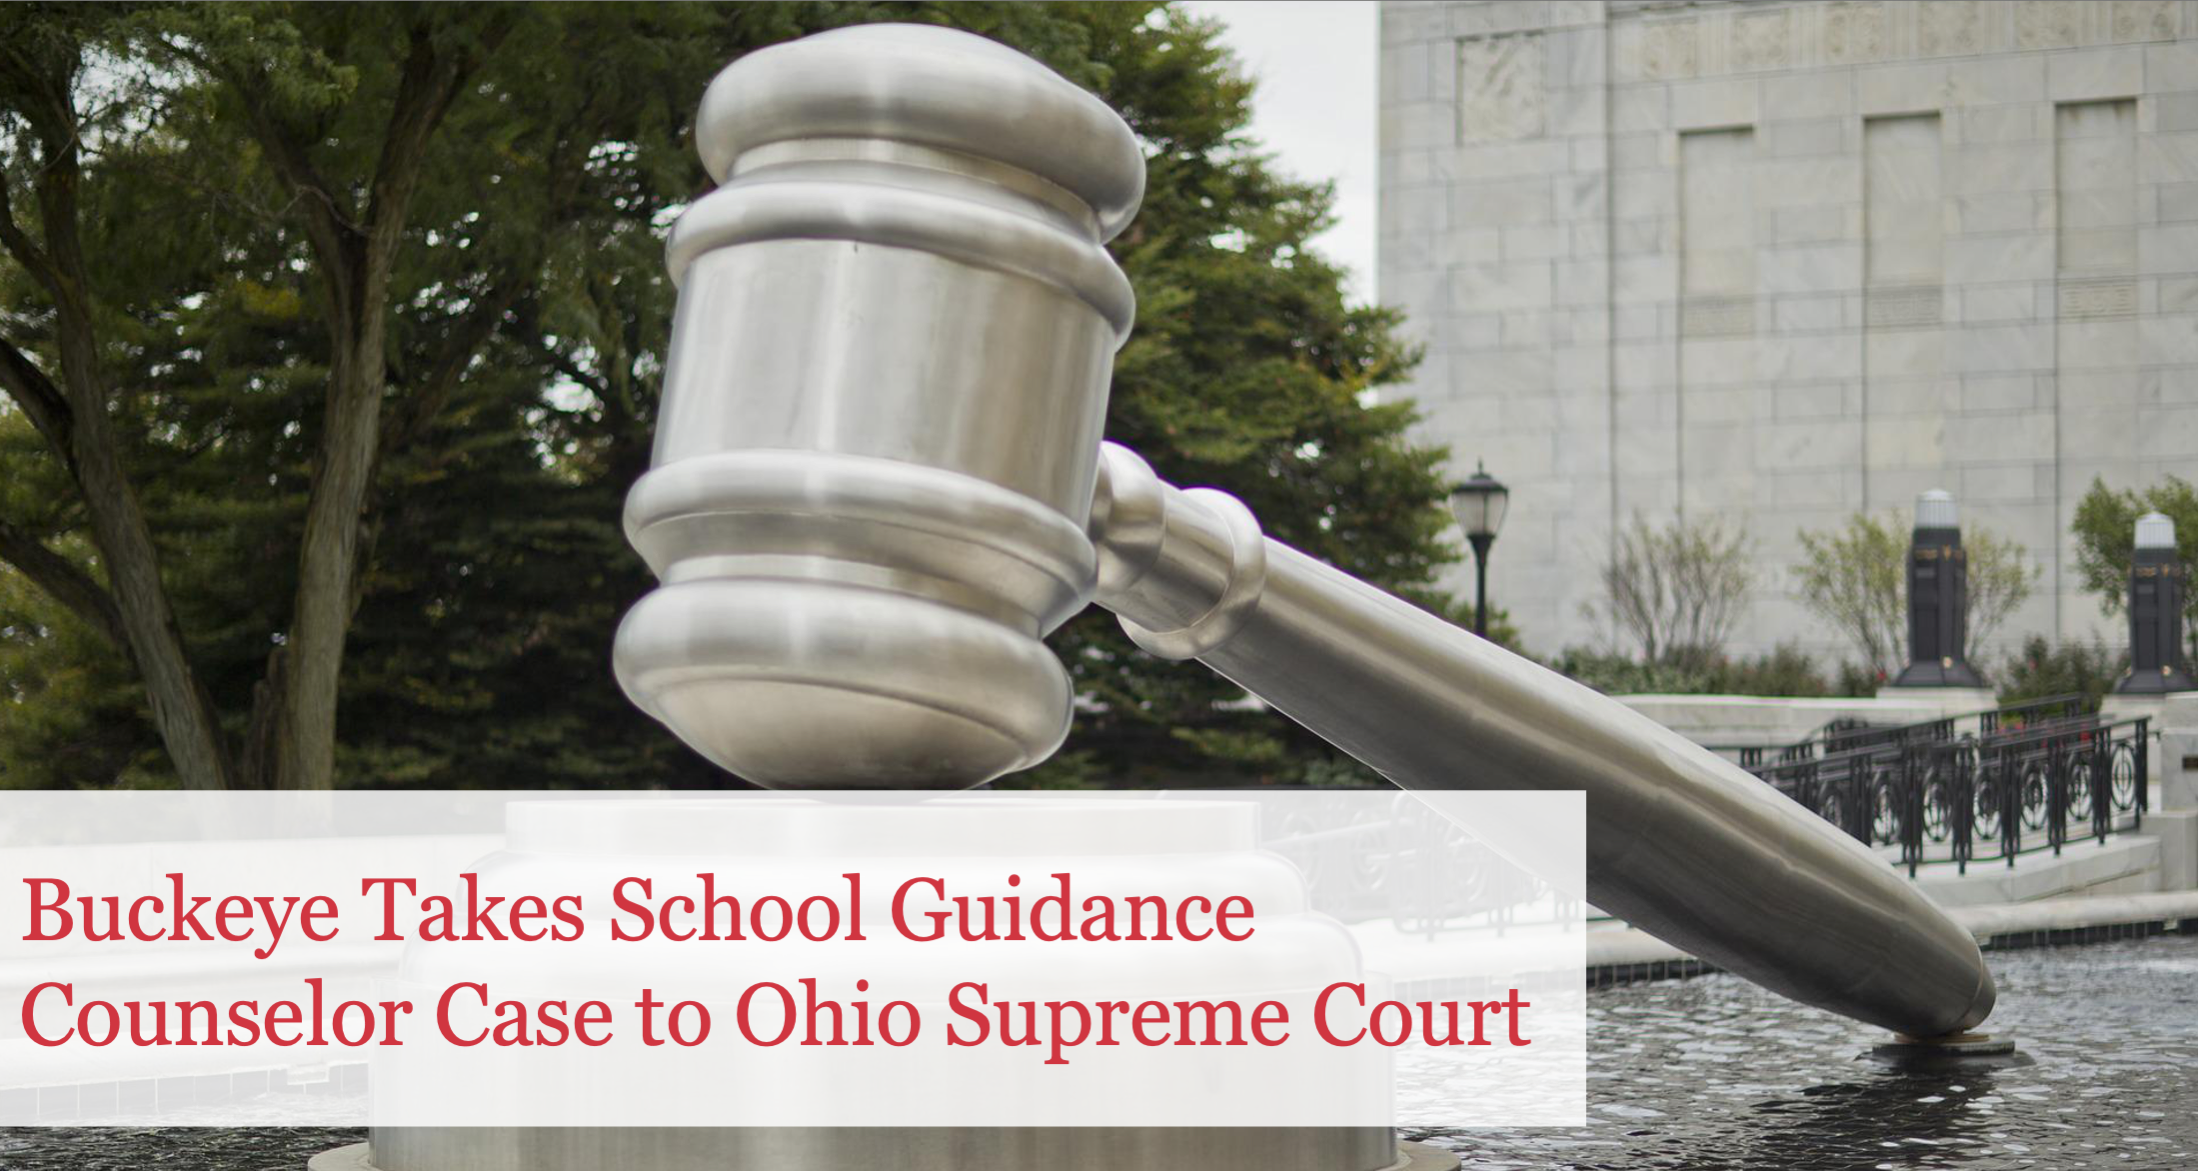 The Buckeye Institute Takes School Guidance Counselor Case to Ohio Supreme Court